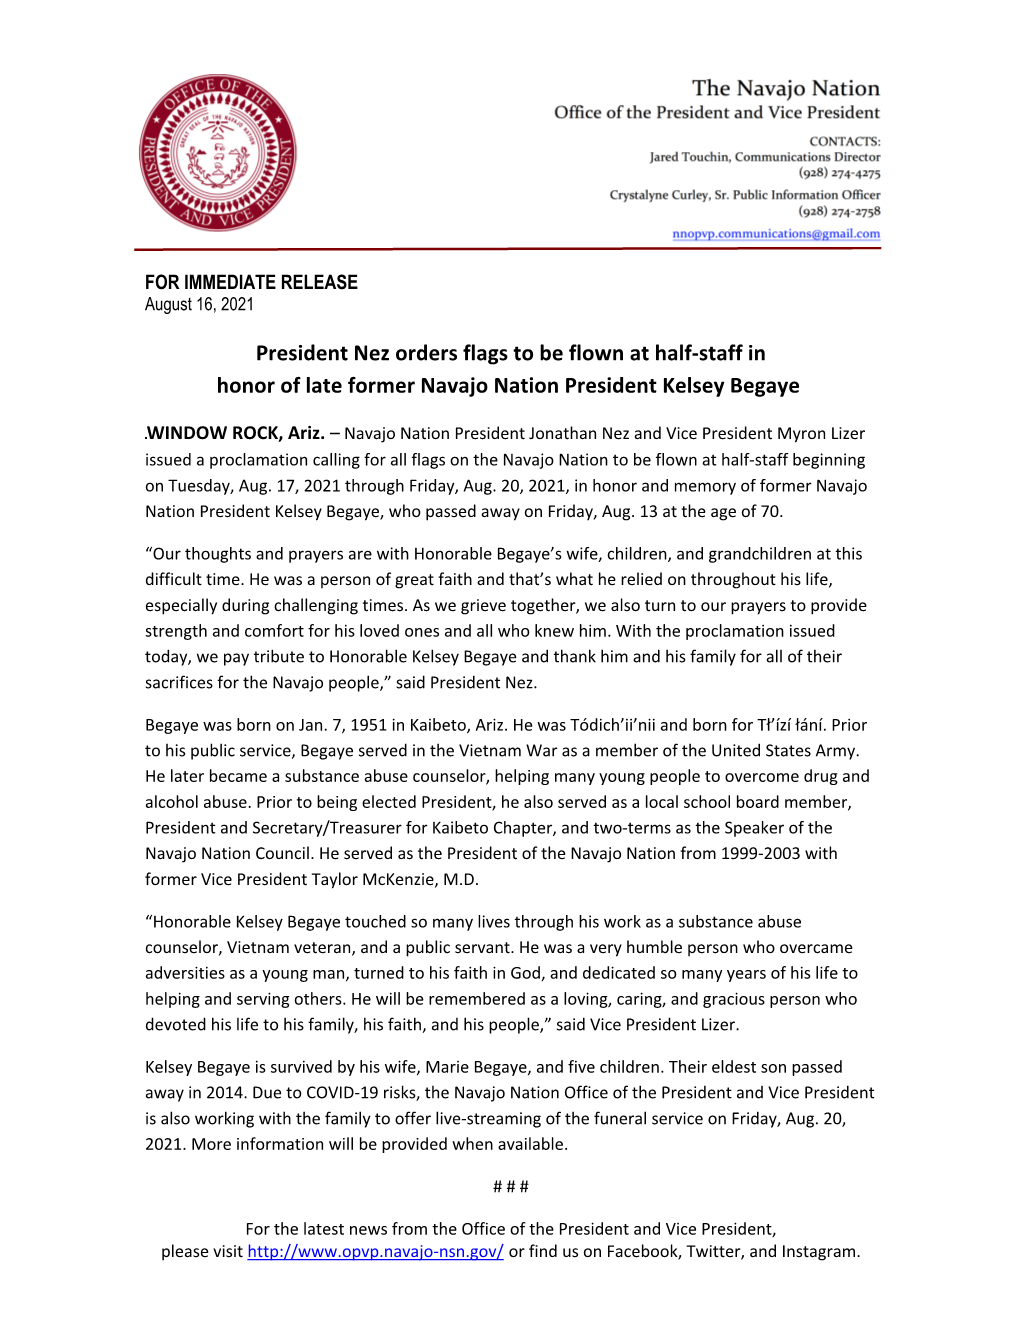 President Nez Orders Flags to Be Flown at Half-Staff in Honor of Late Former Navajo Nation President Kelsey Begaye